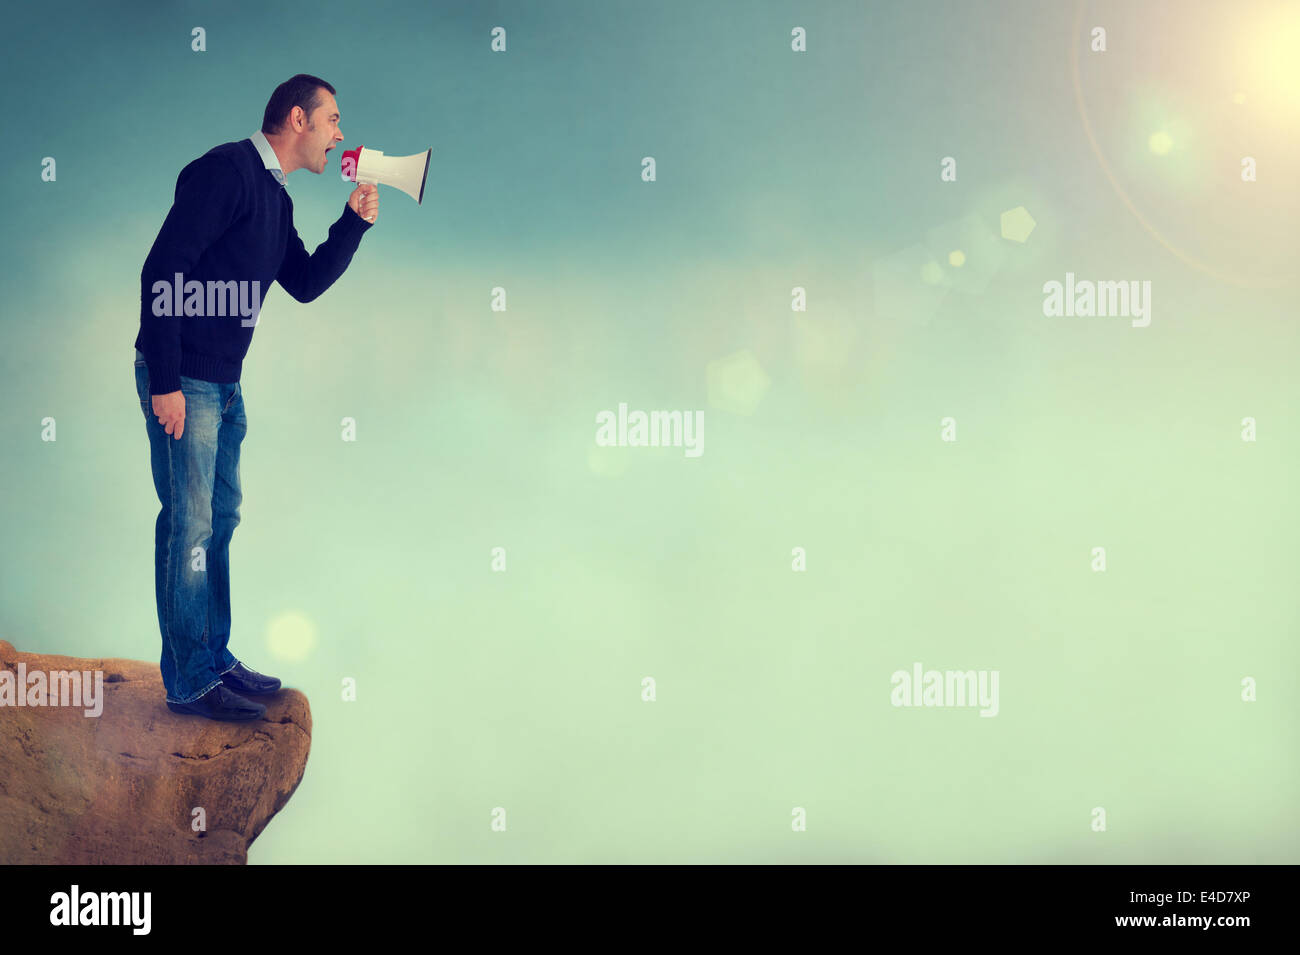 man with a bullhorn, loudhailer or megaphone shouting from edge of a cliff Stock Photo